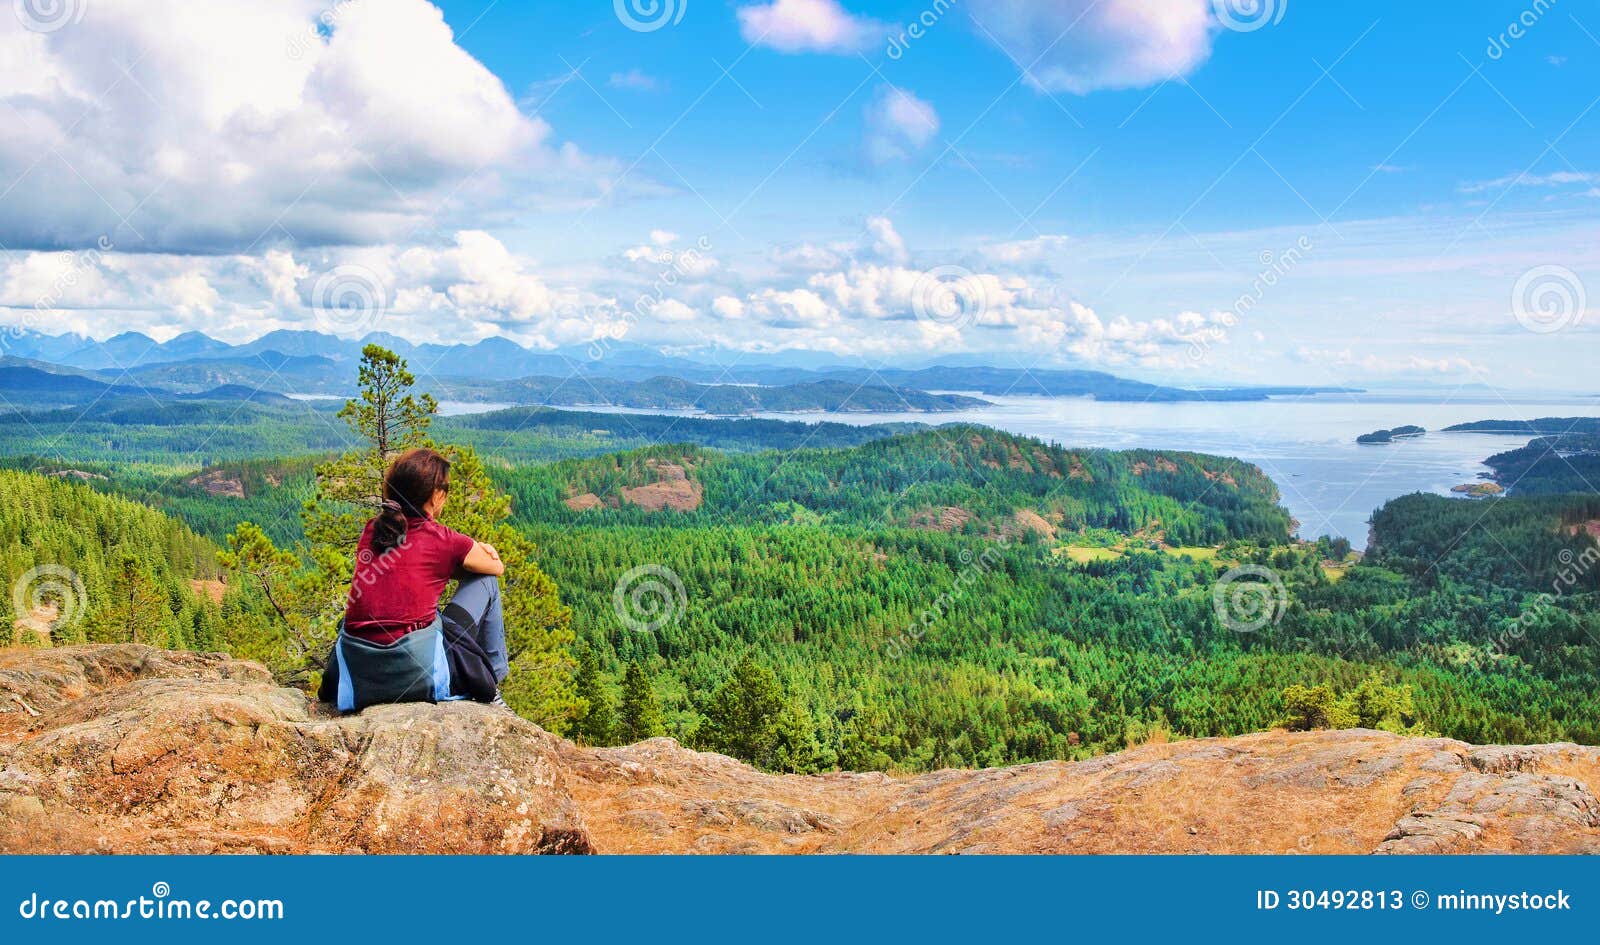 woman sitting on a rock and enjoying the beautiful view on vancouver island, british columbia, canada